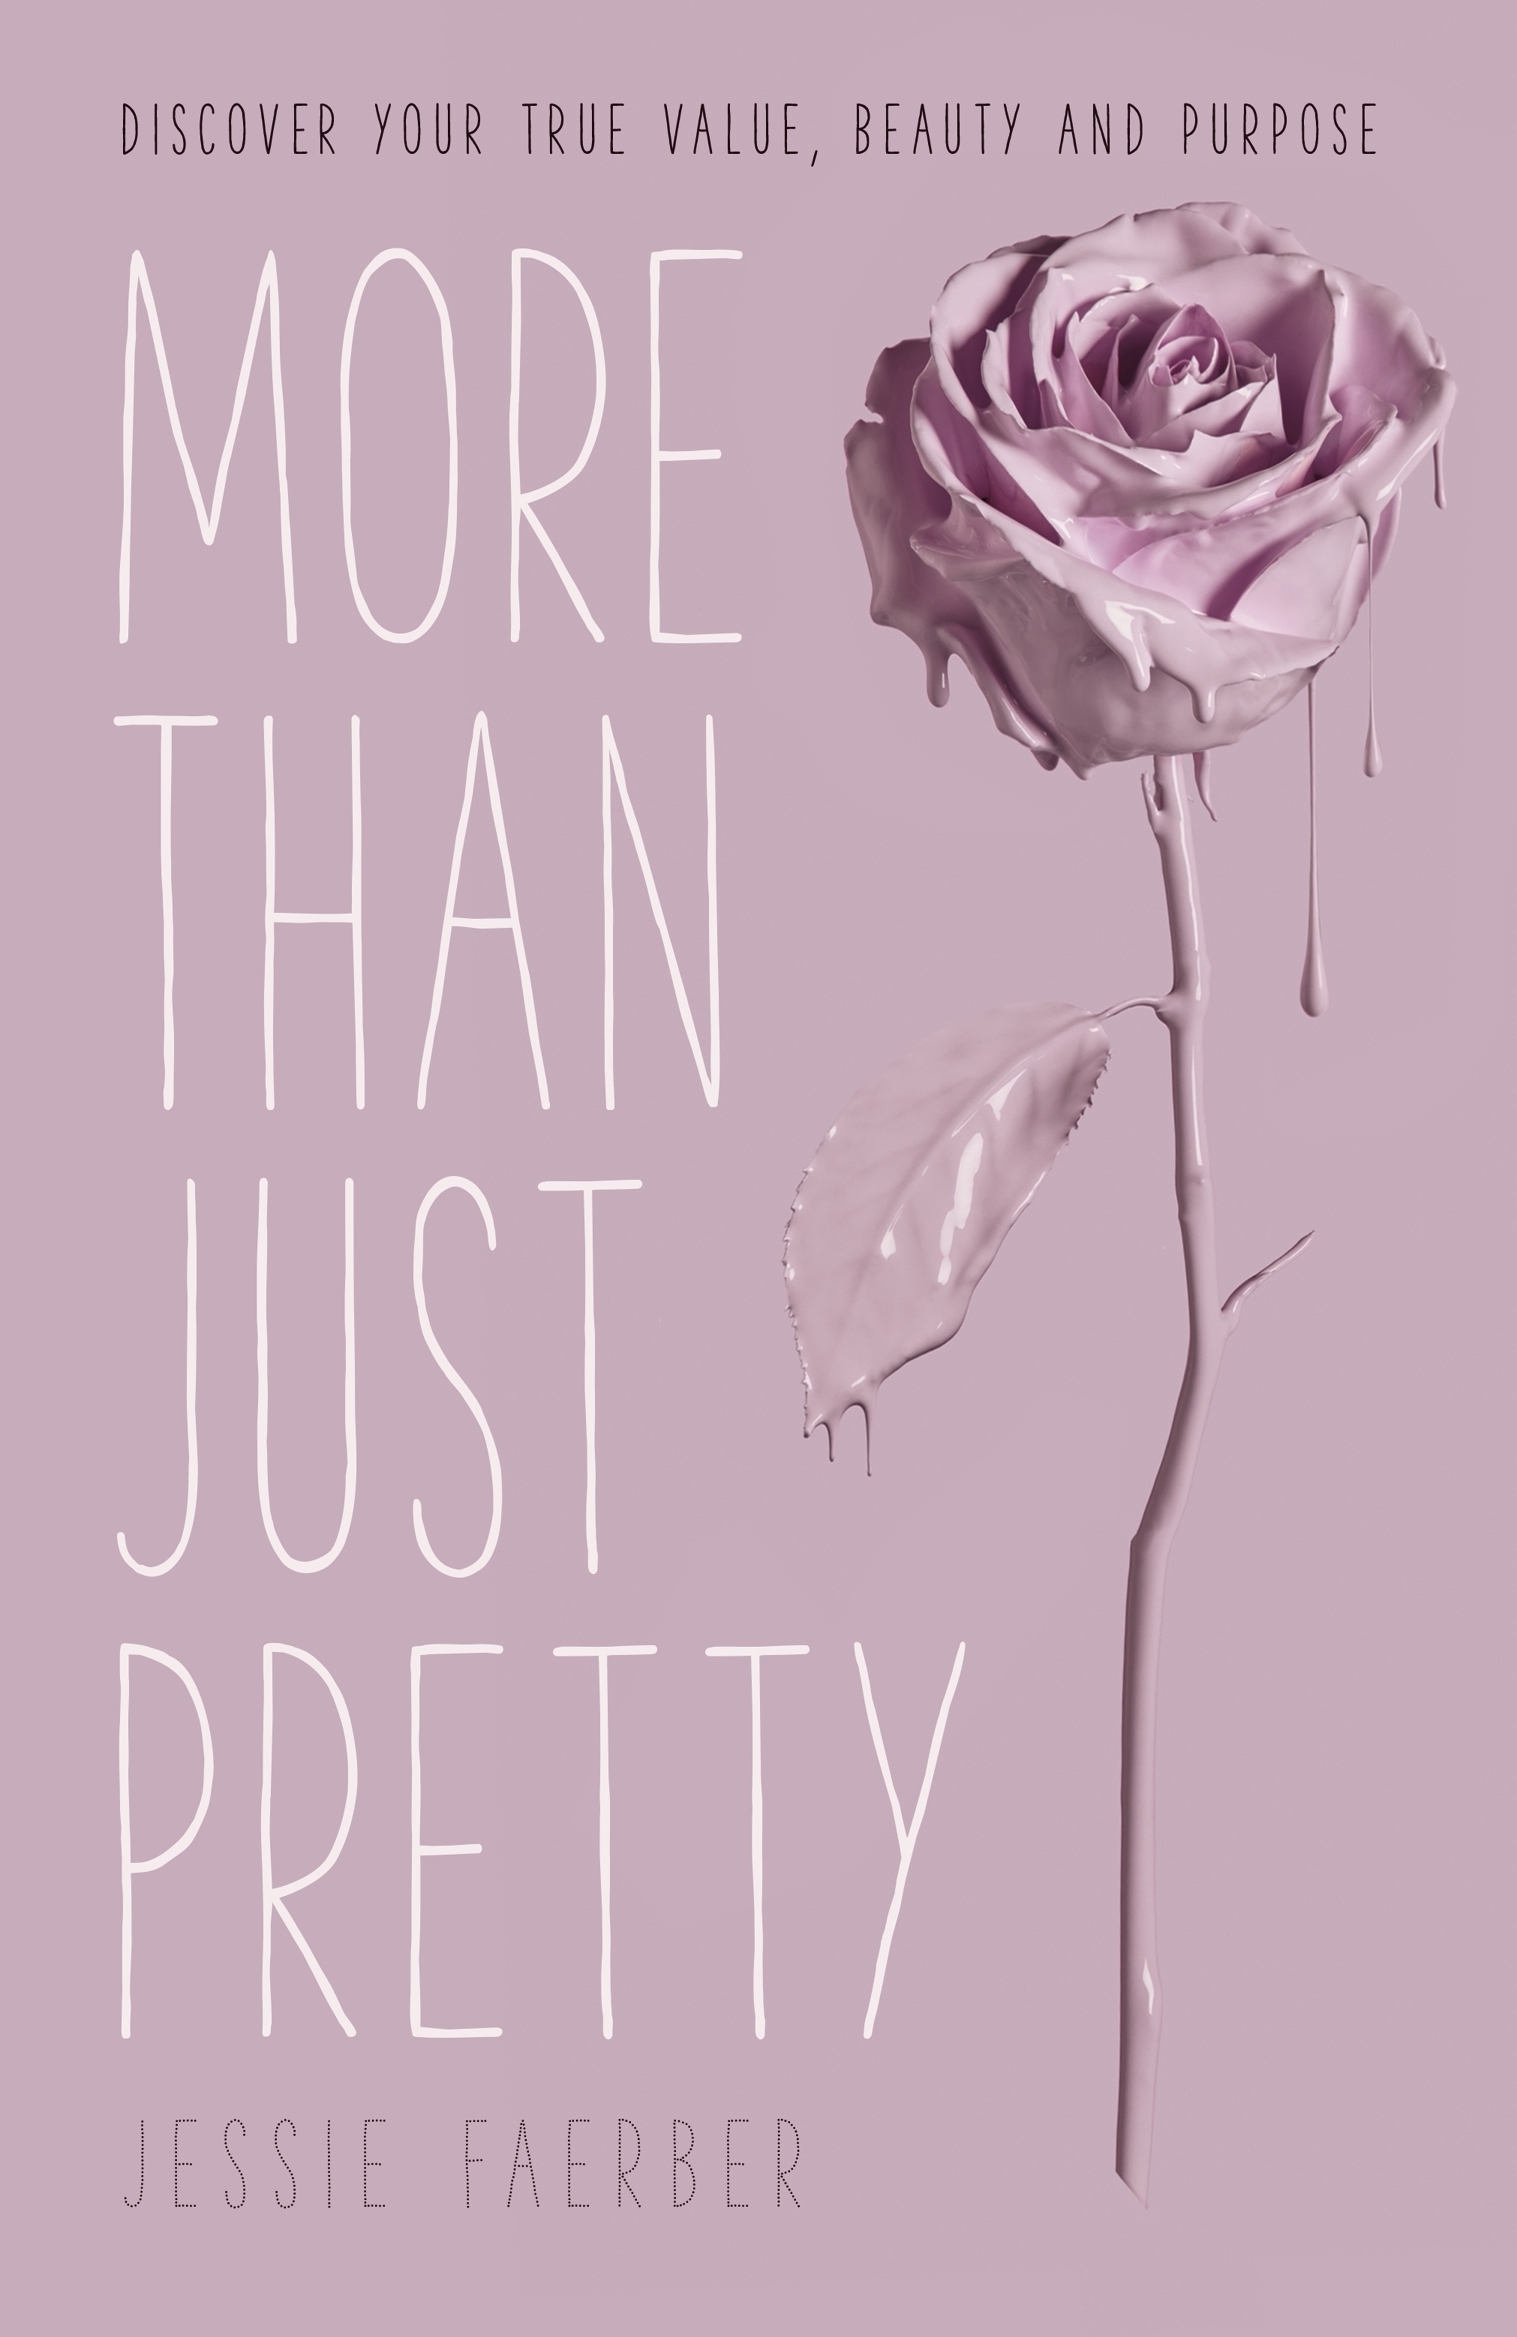 More Than Just Pretty